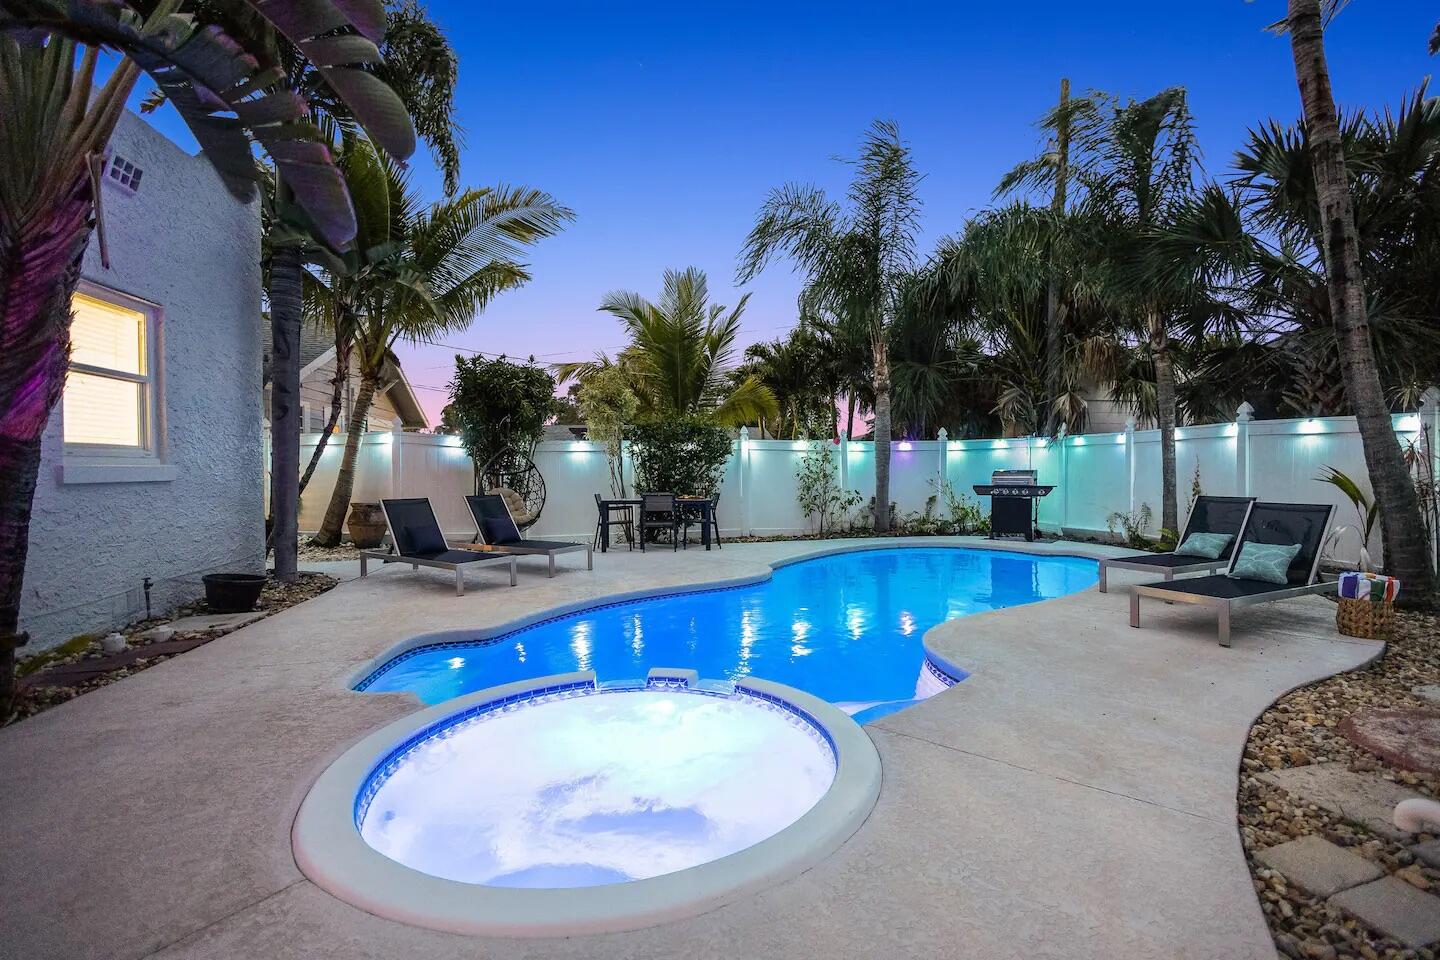 a swimming pool with outdoor seating yard and barbeque oven